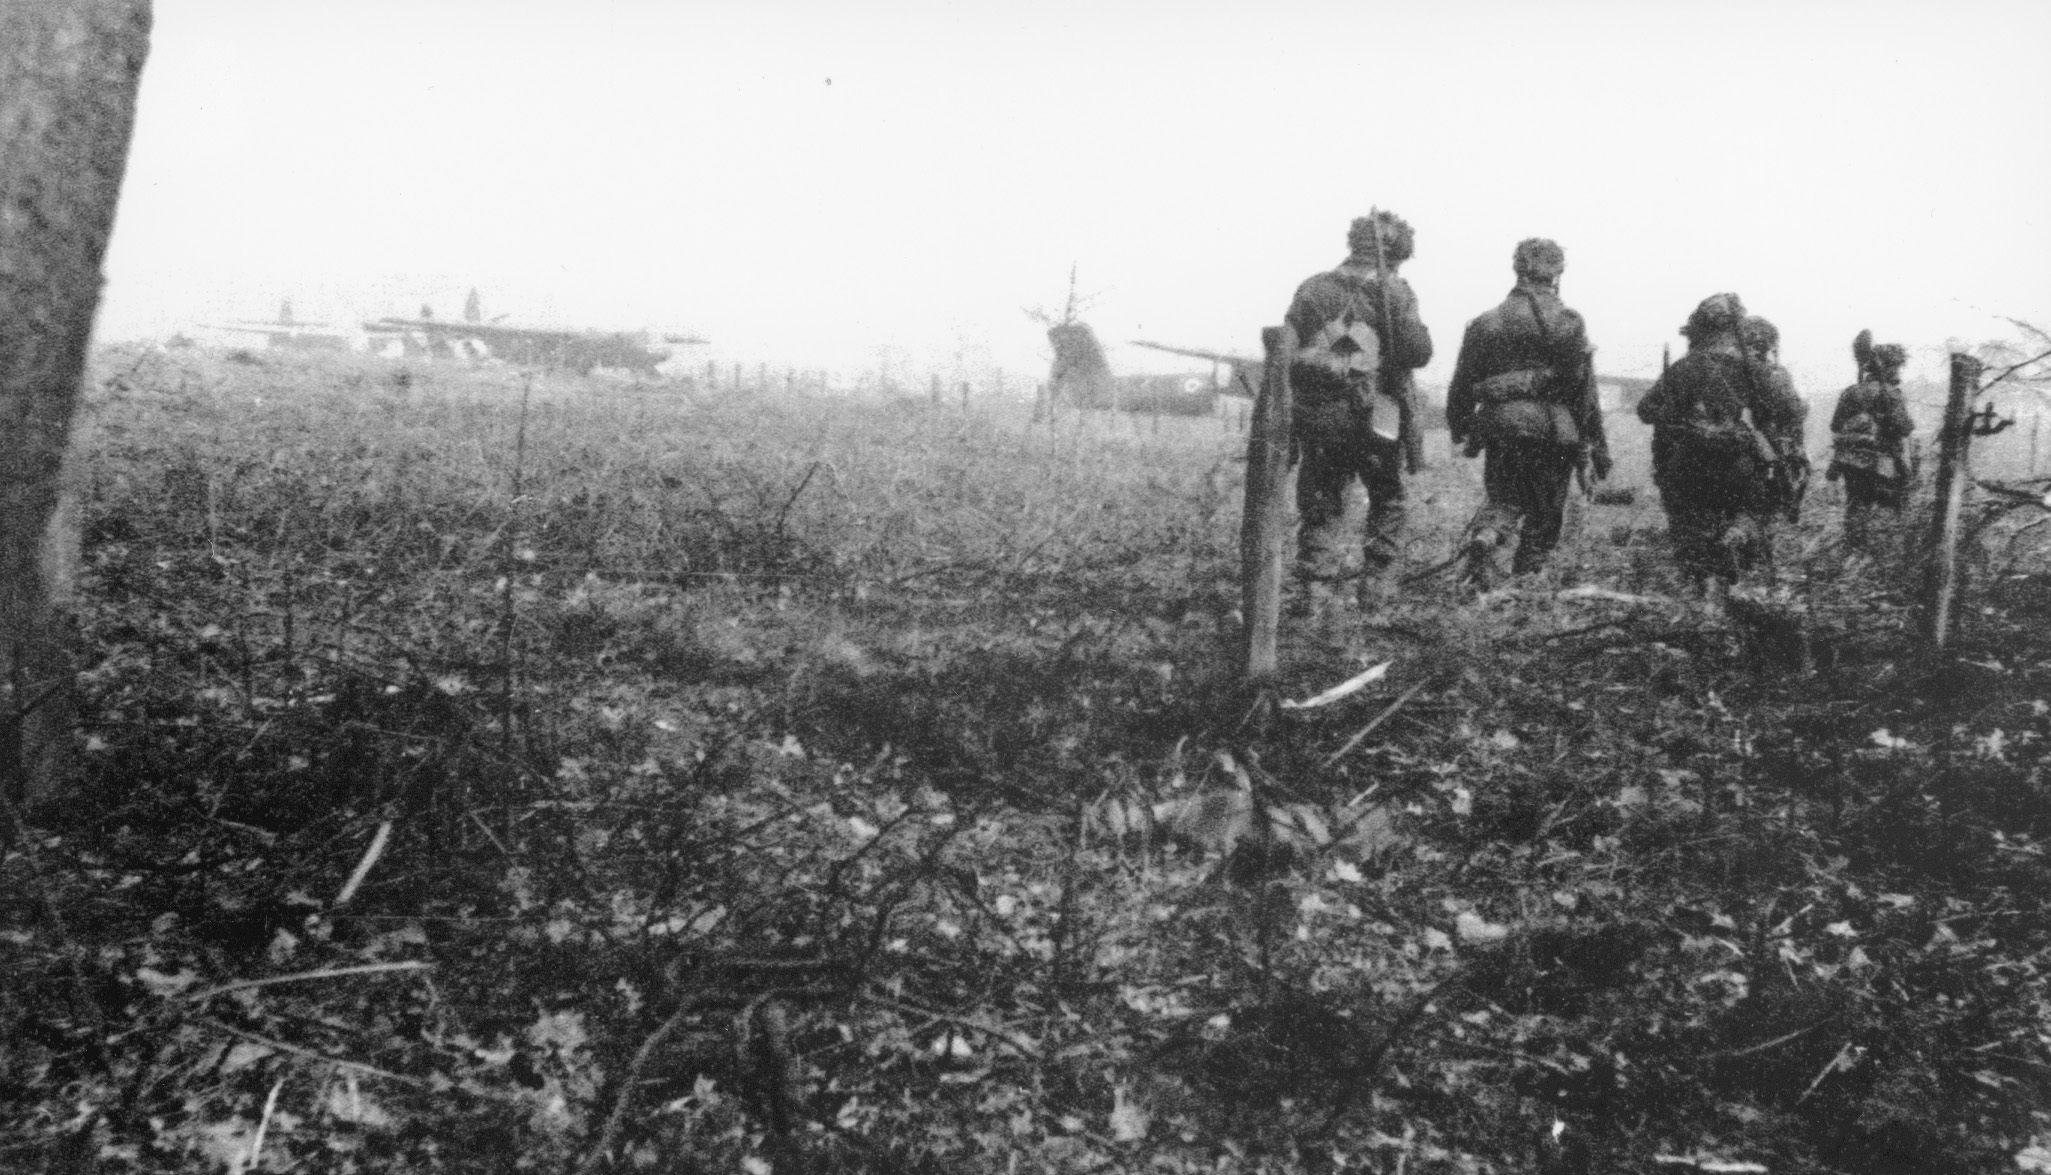 Paratroopers move along the edge of a drop zone after the fighting had ceased.